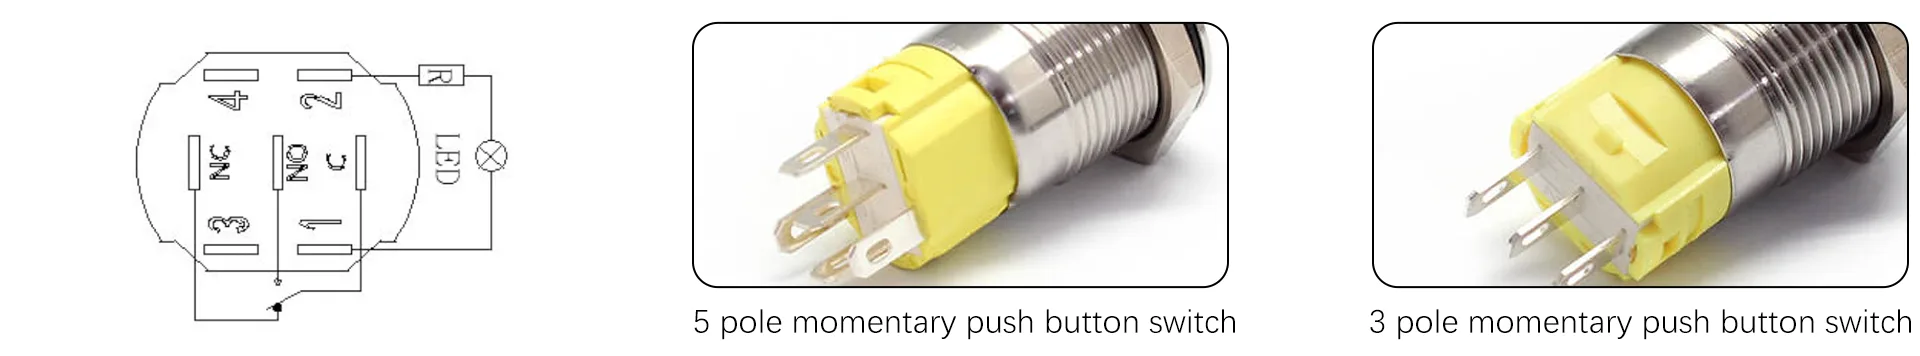 5 pole momentary push button switch